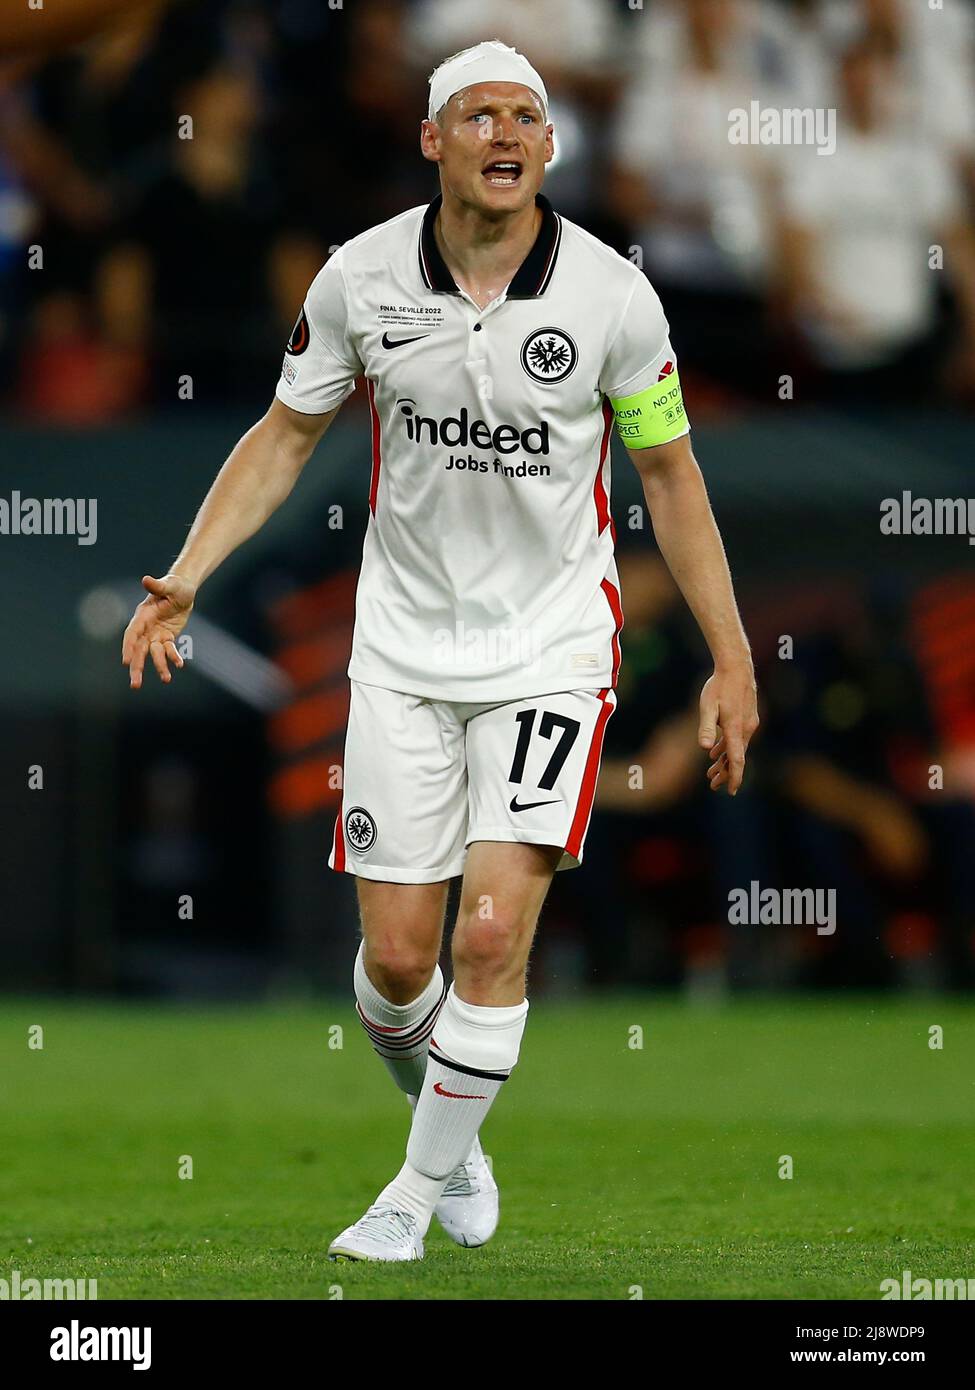 Sevilla, Spain. 18th May, 2022. Sebastian Rode of Eintracht Frankfurt during the UEFA Europa League, final match between Eintracht Frakfurt and Rangers FC played at Sanchez Pizjuan Stadium on May 18, 2022 in Sevilla, Spain. (Photo by PRESSINPHOTO) Credit: PRESSINPHOTO SPORTS AGENCY/Alamy Live News Stock Photo